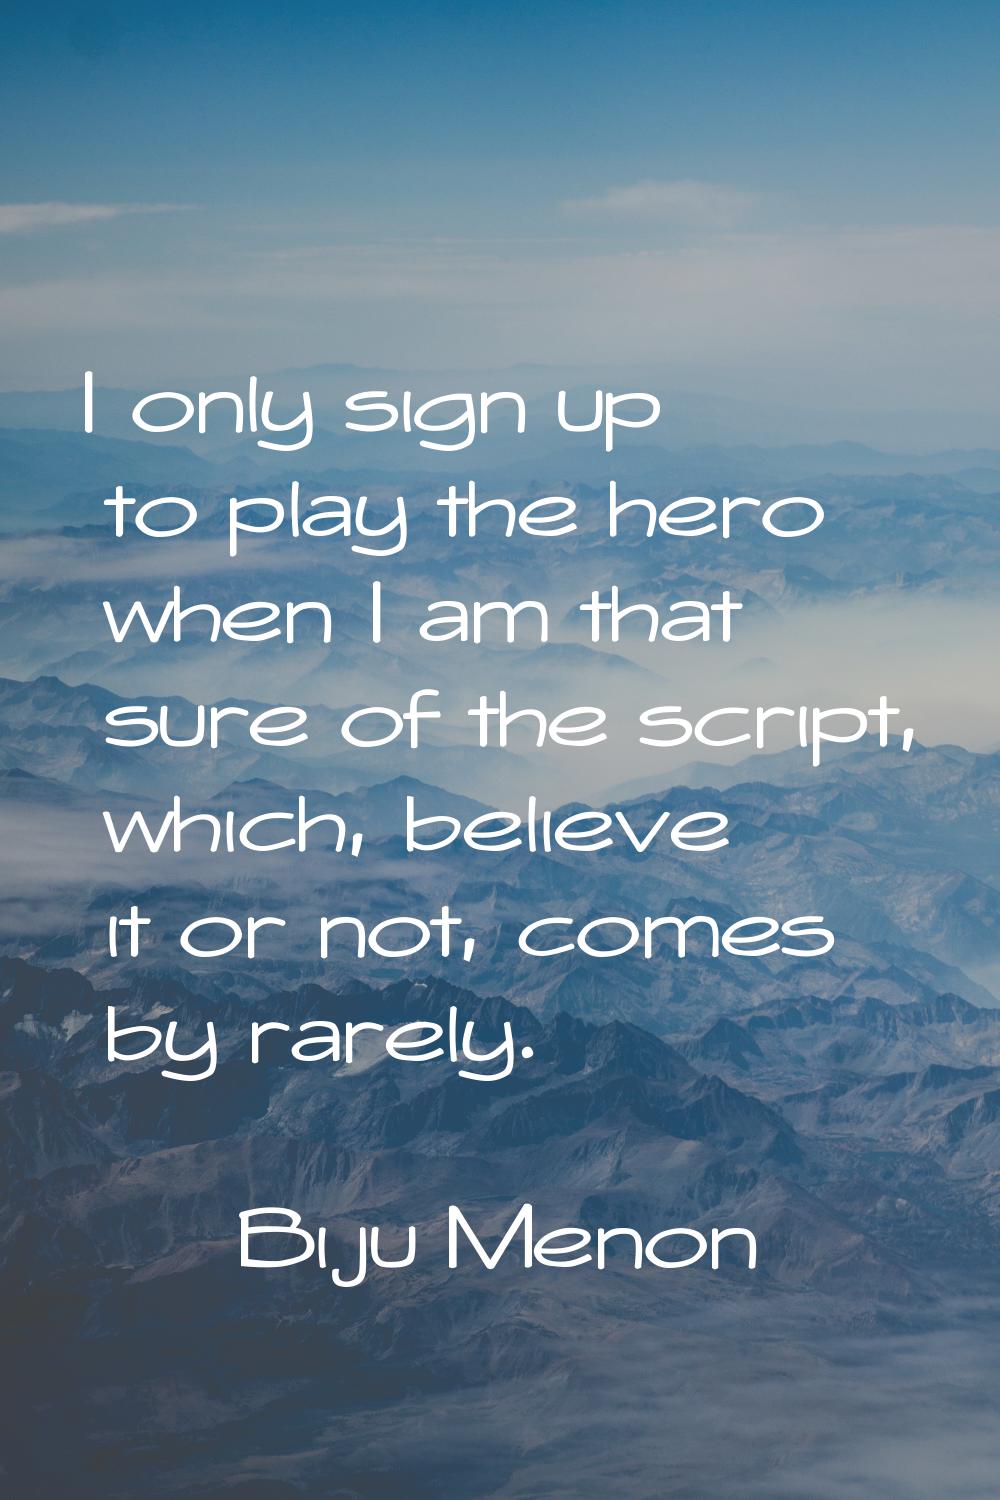 I only sign up to play the hero when I am that sure of the script, which, believe it or not, comes 